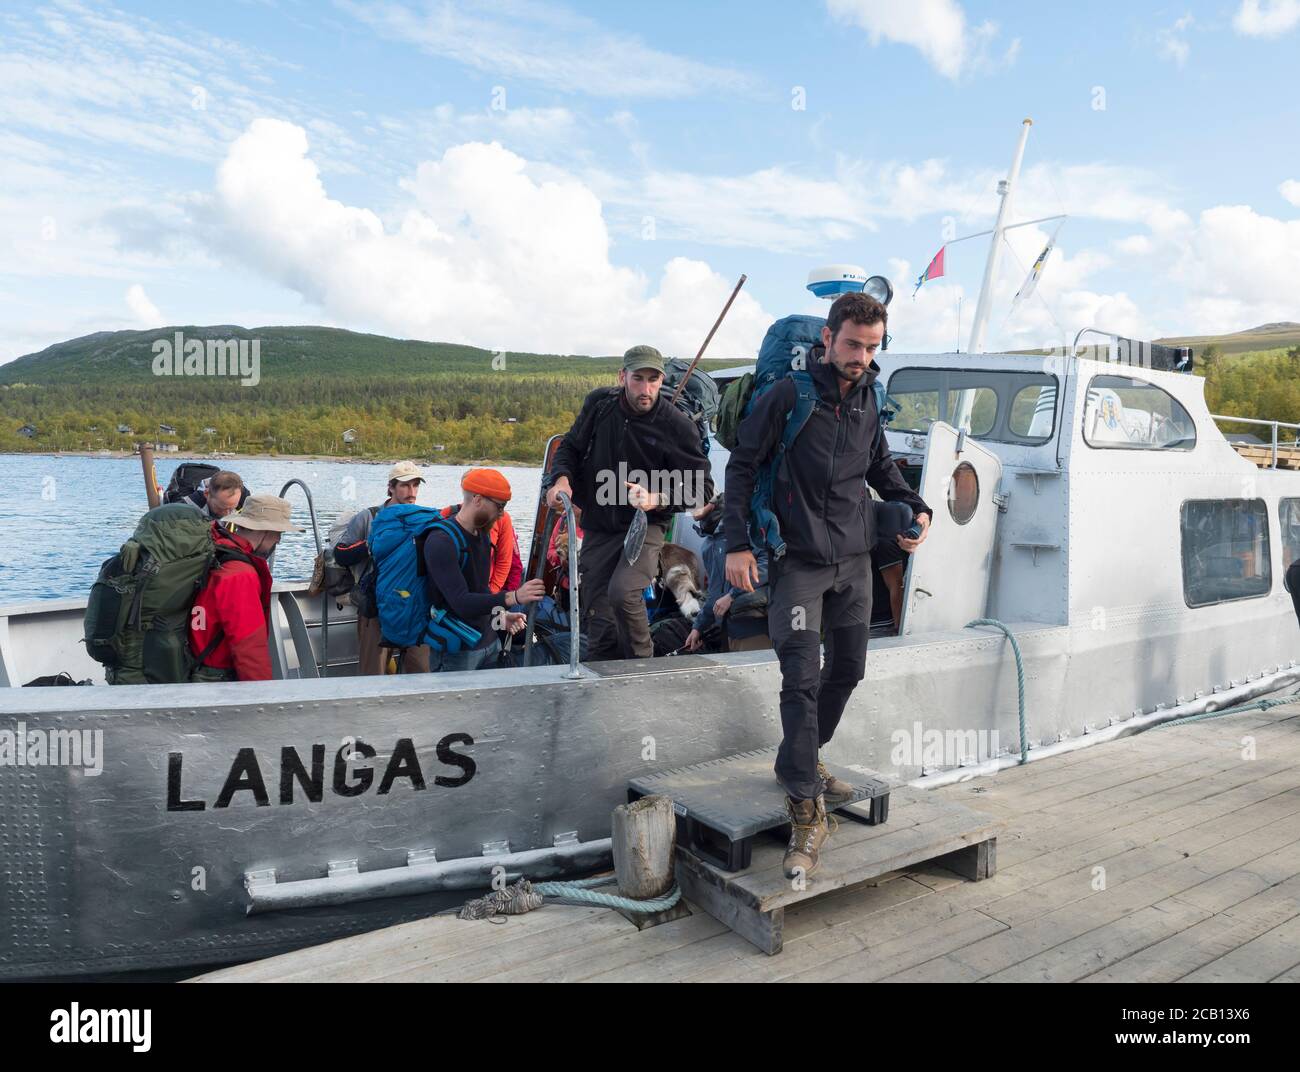 Vakkotavare, Norrbotten, Sweden, Agust 30, 2019: group of hikers and tourist getting off ferry boat ship transport from Vakkotavare to Saltoluokta Stock Photo